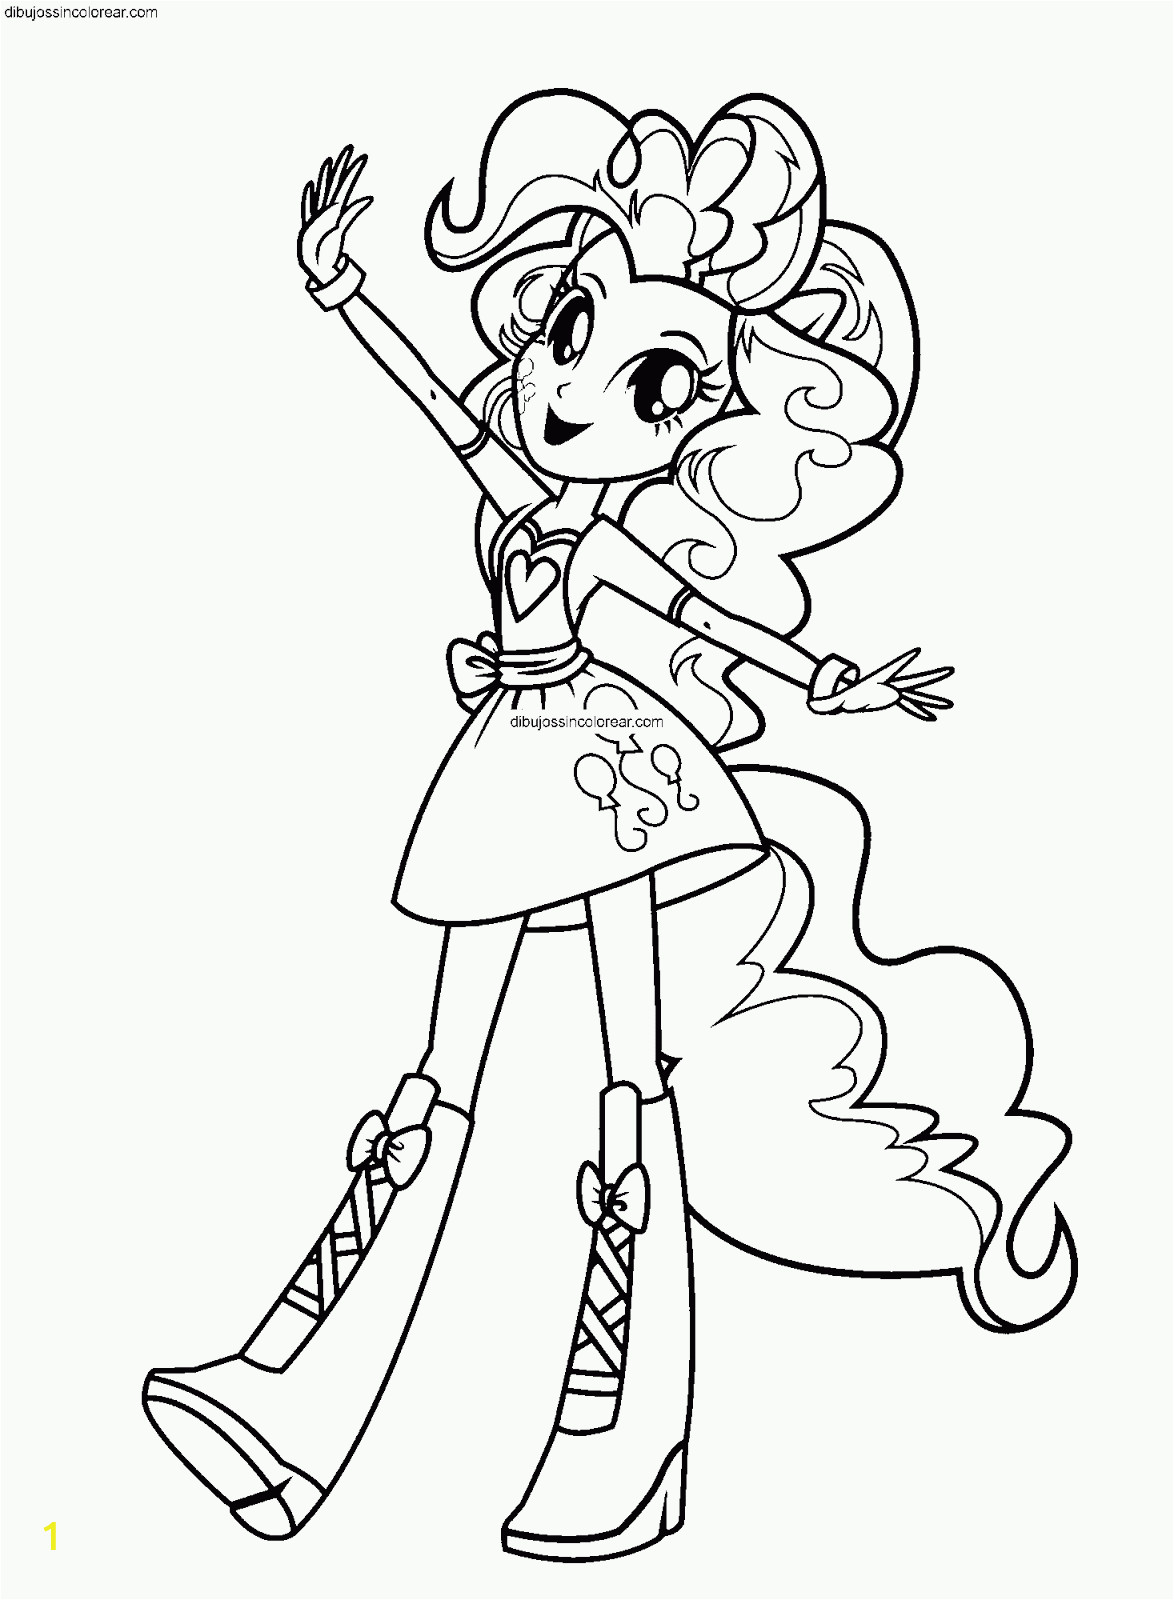 equestria girls pinkie pie coloring pages